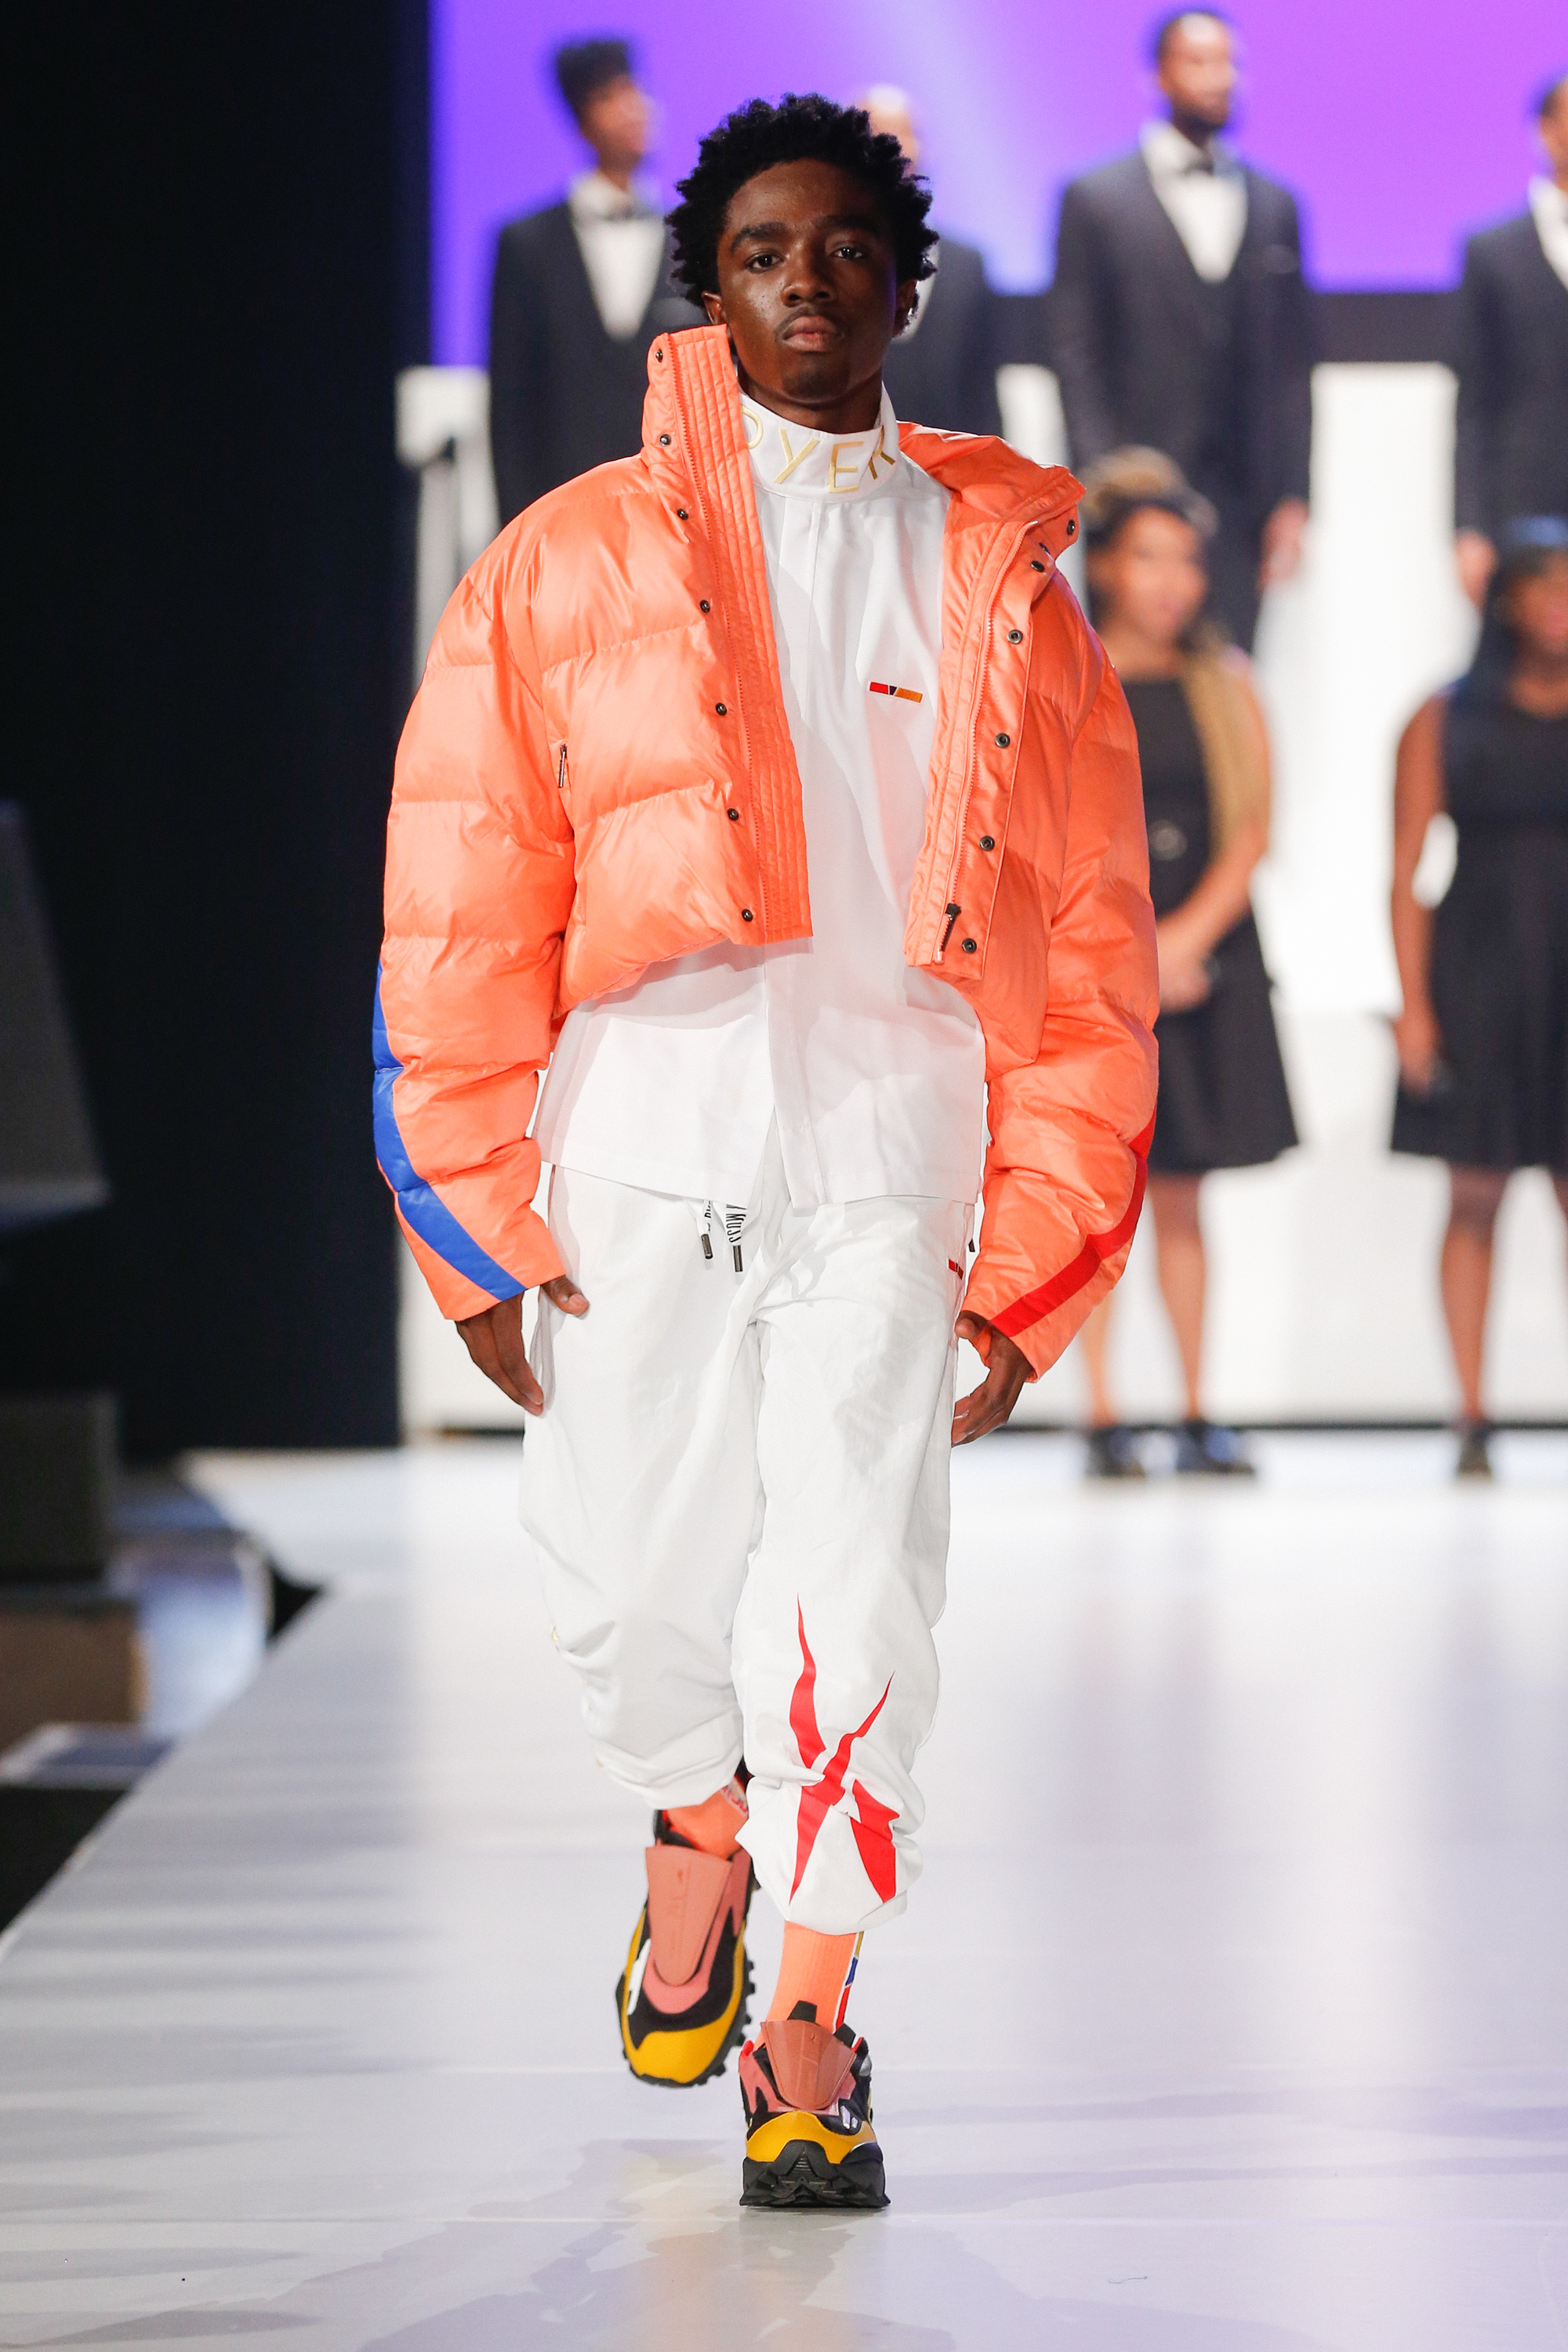 Kerby Jean-Raymond will be the first Black American designer to